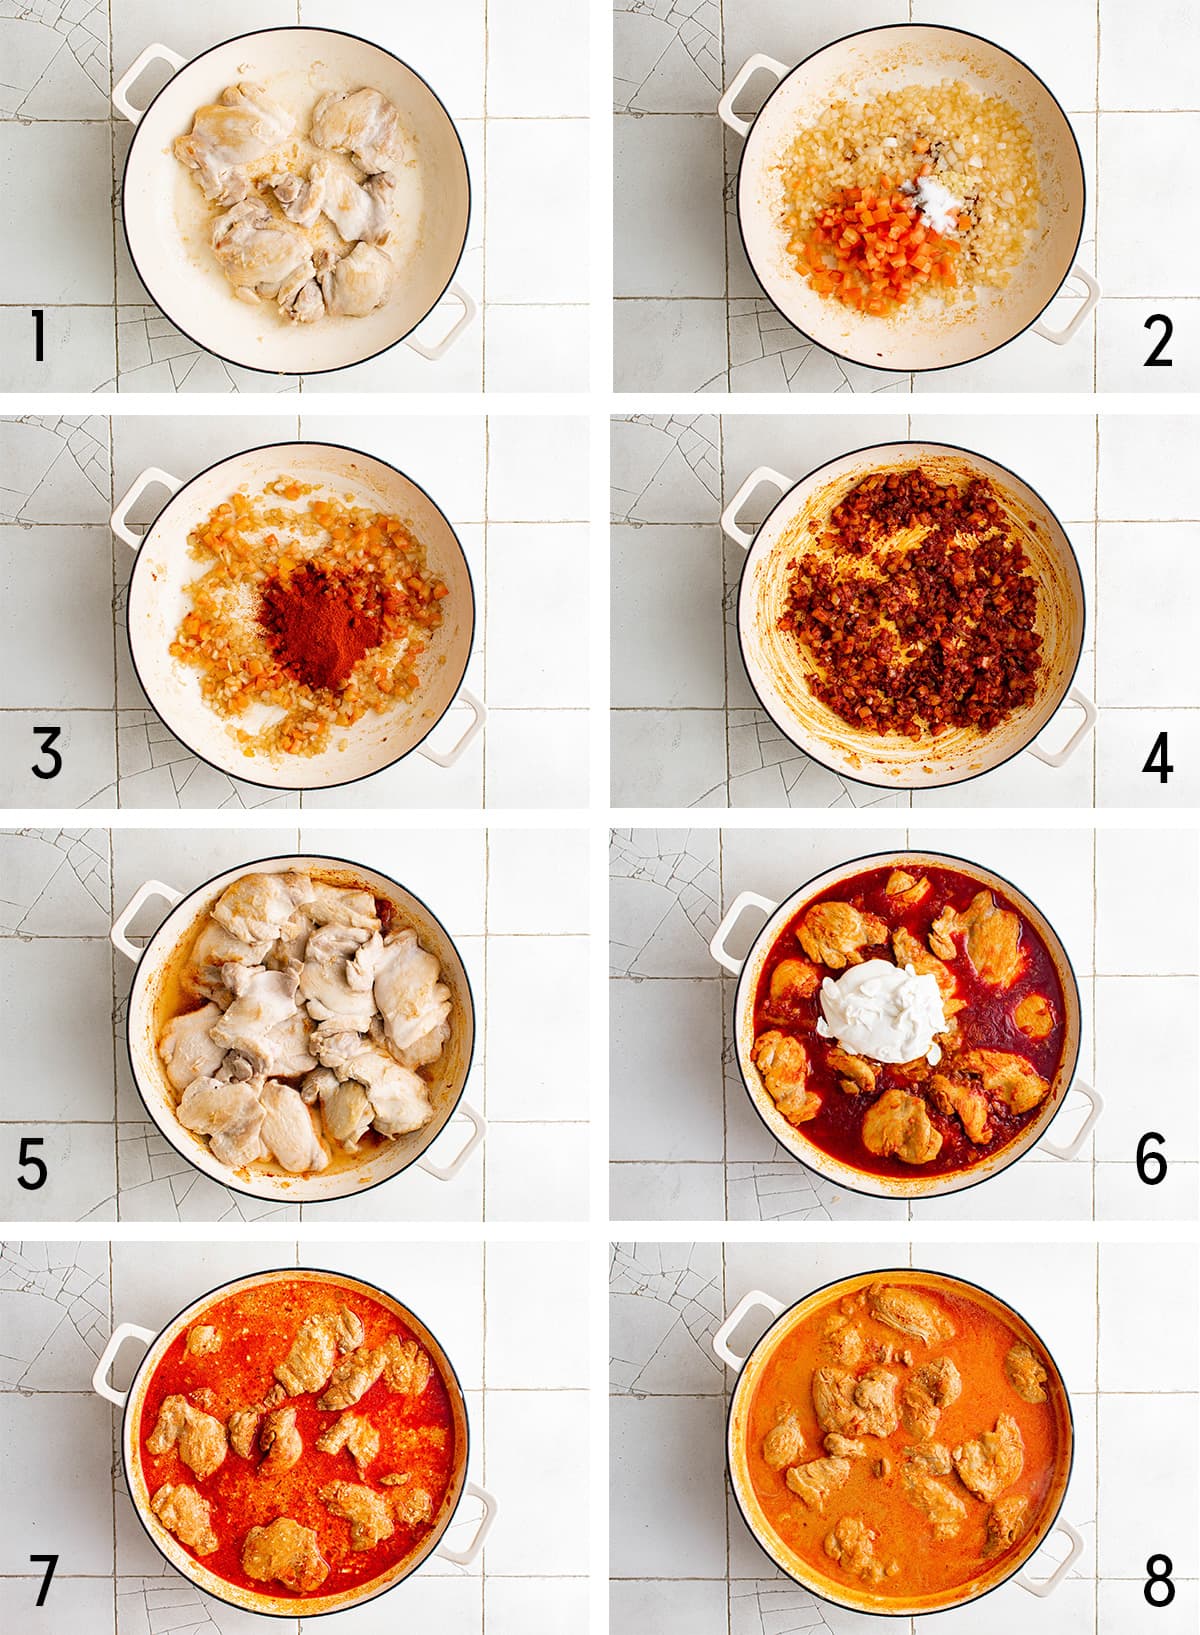 Collage of images showing how to make chicken paprikash.